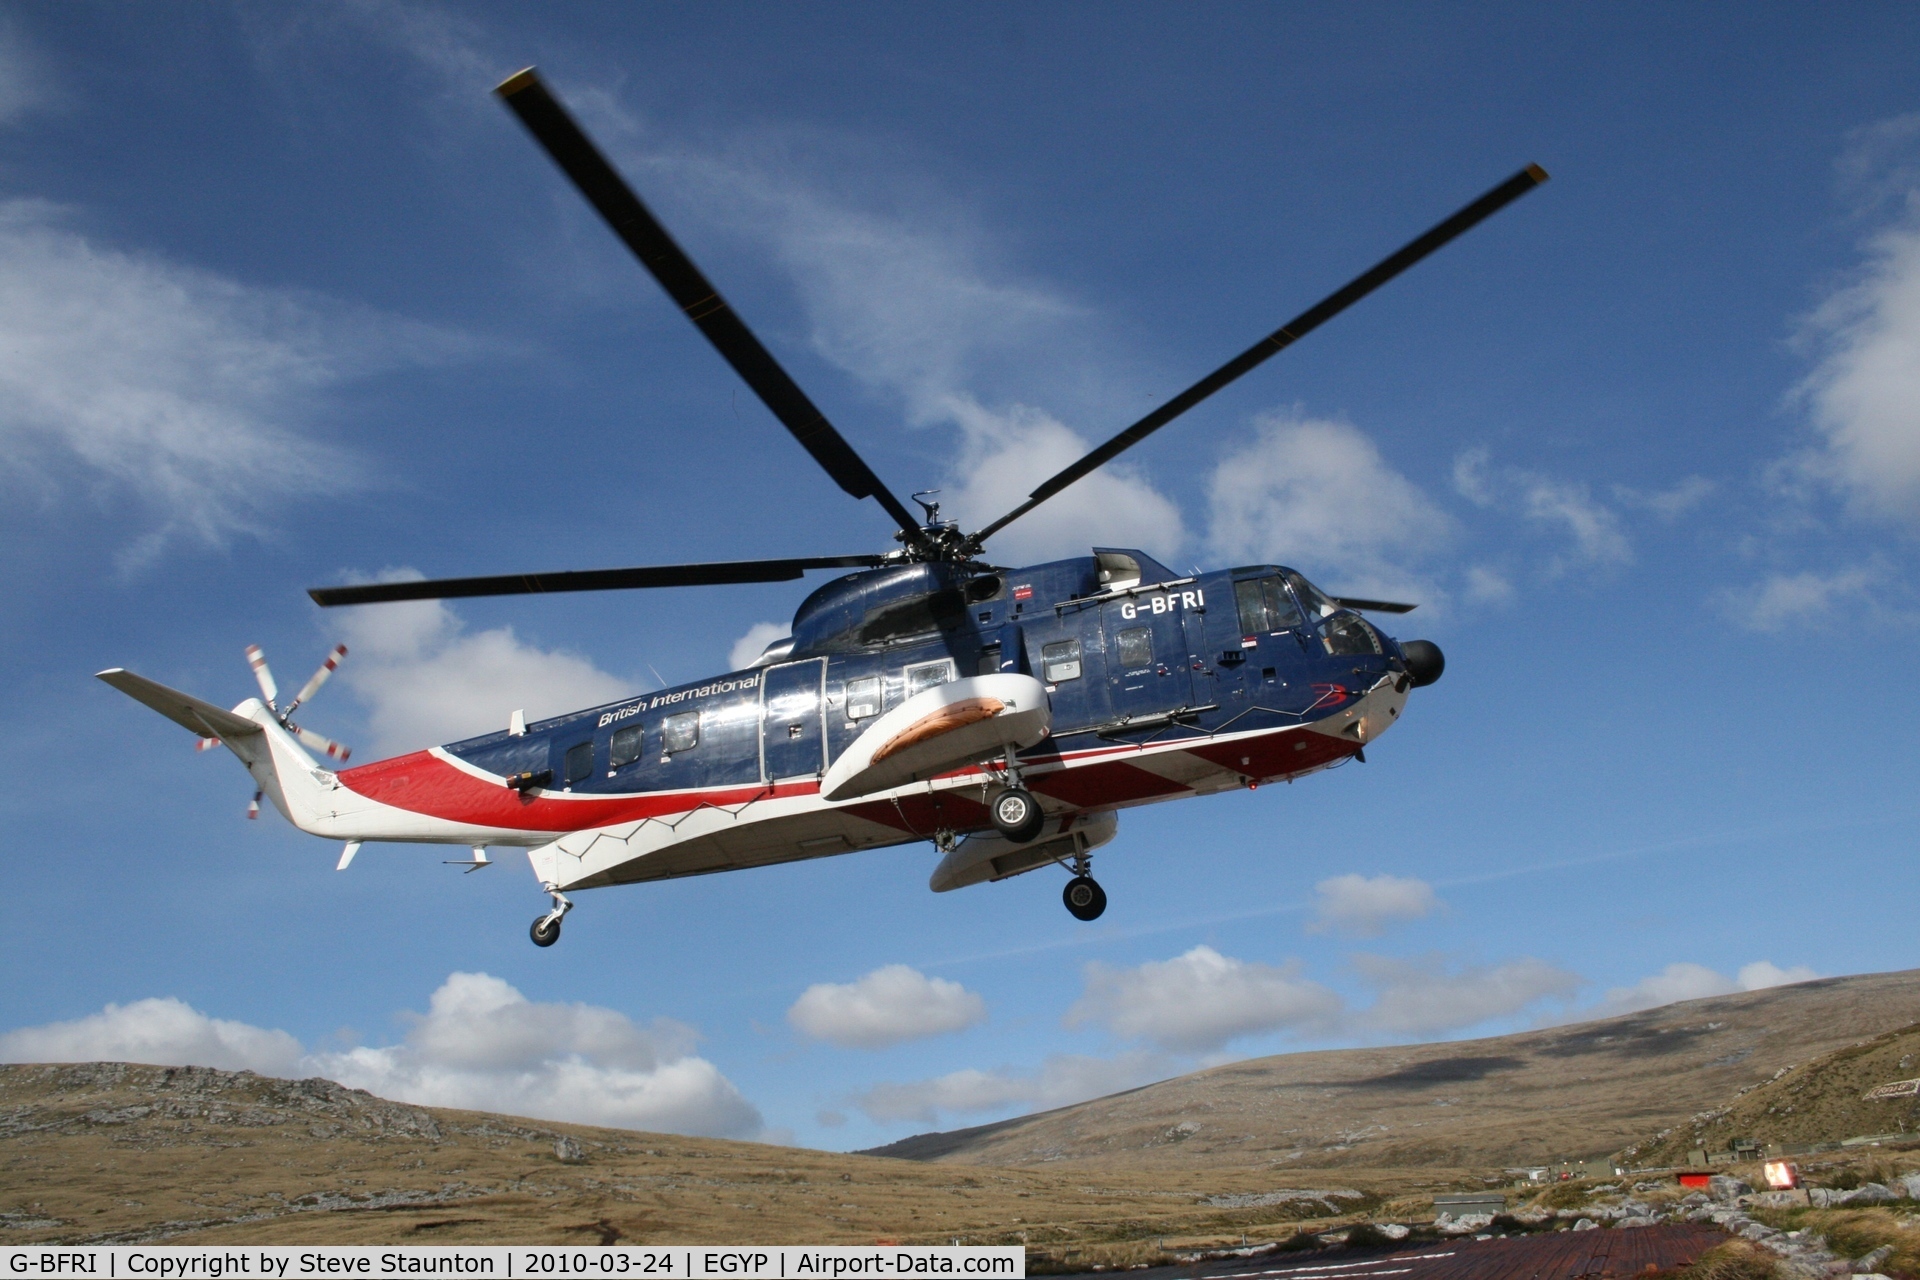 G-BFRI, 1978 Sikorsky S-61N C/N 61809, Taken in the Falkland Islands, March 2010. Taxi please!!!!